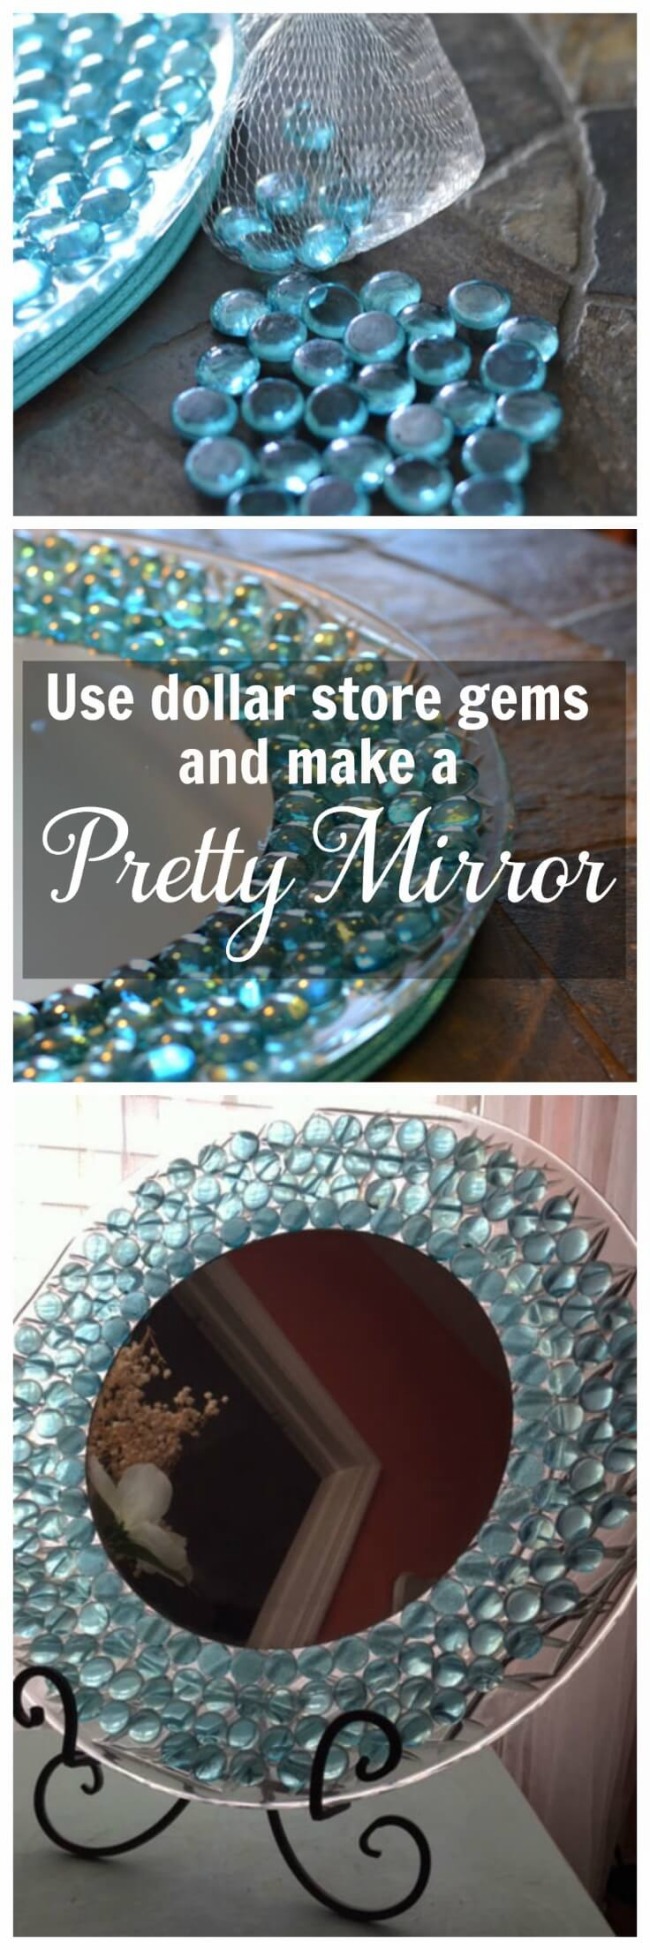 24 Bottle Glass Mirror with Super Catchy Gem Frame suits Best with the StandBase Mirror Projects